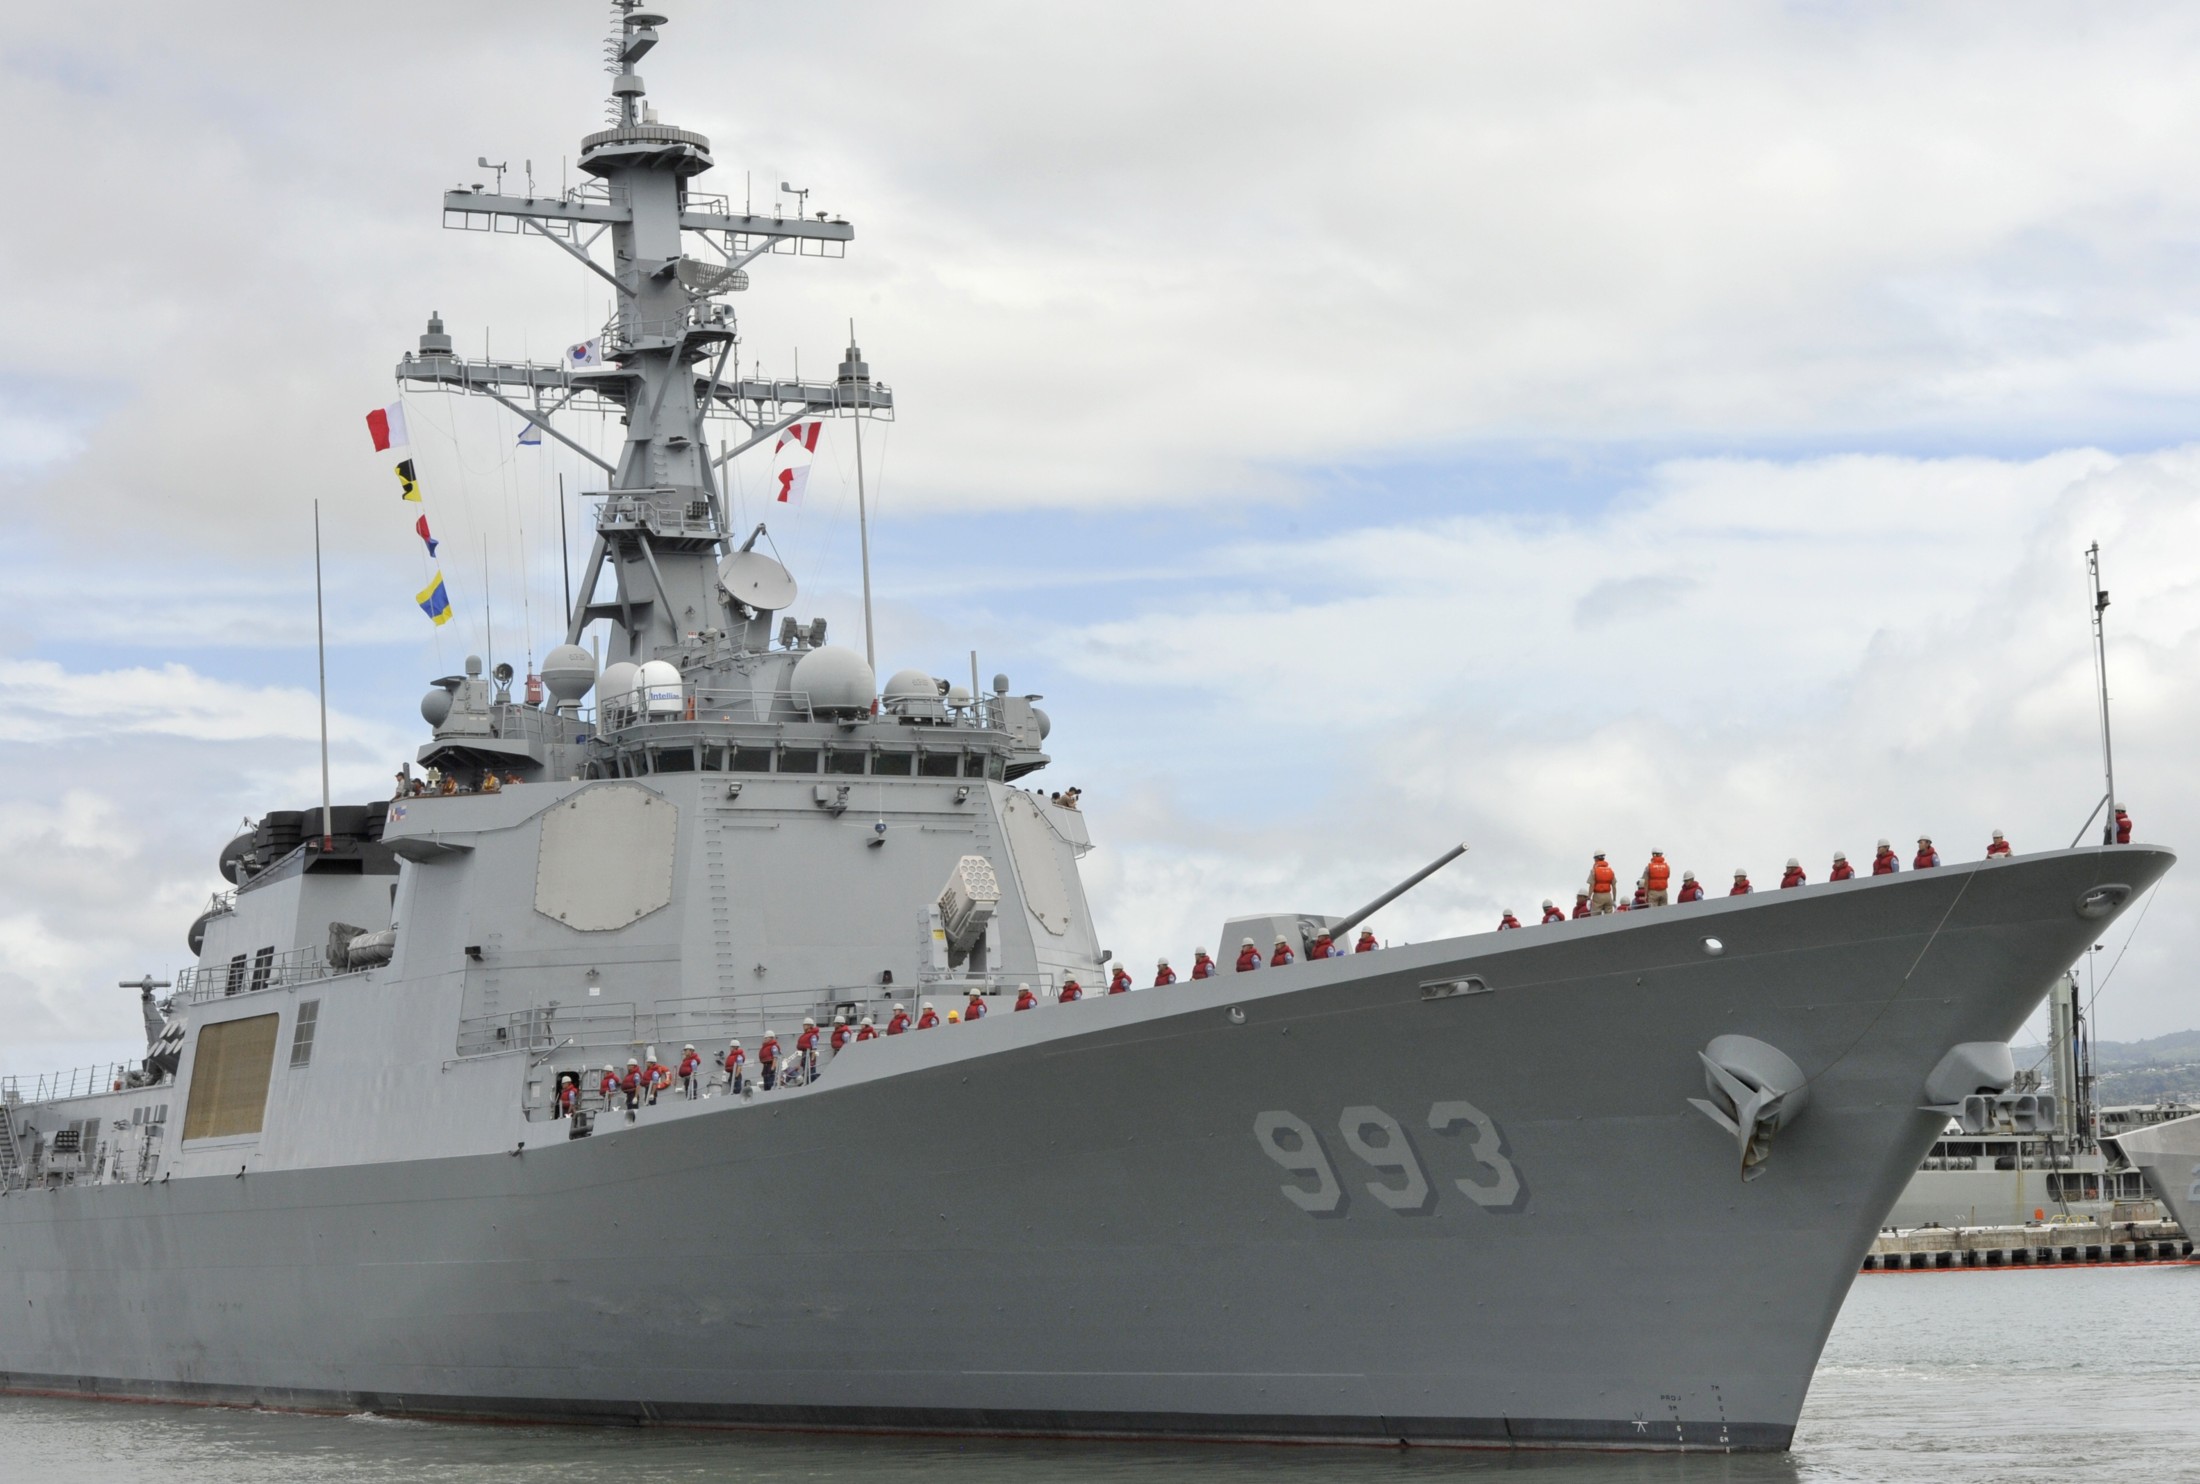 ddg-993 roks seoae ryu seong-ryong sejong the great class guided missile destroyer aegis republic of korea navy rokn 19